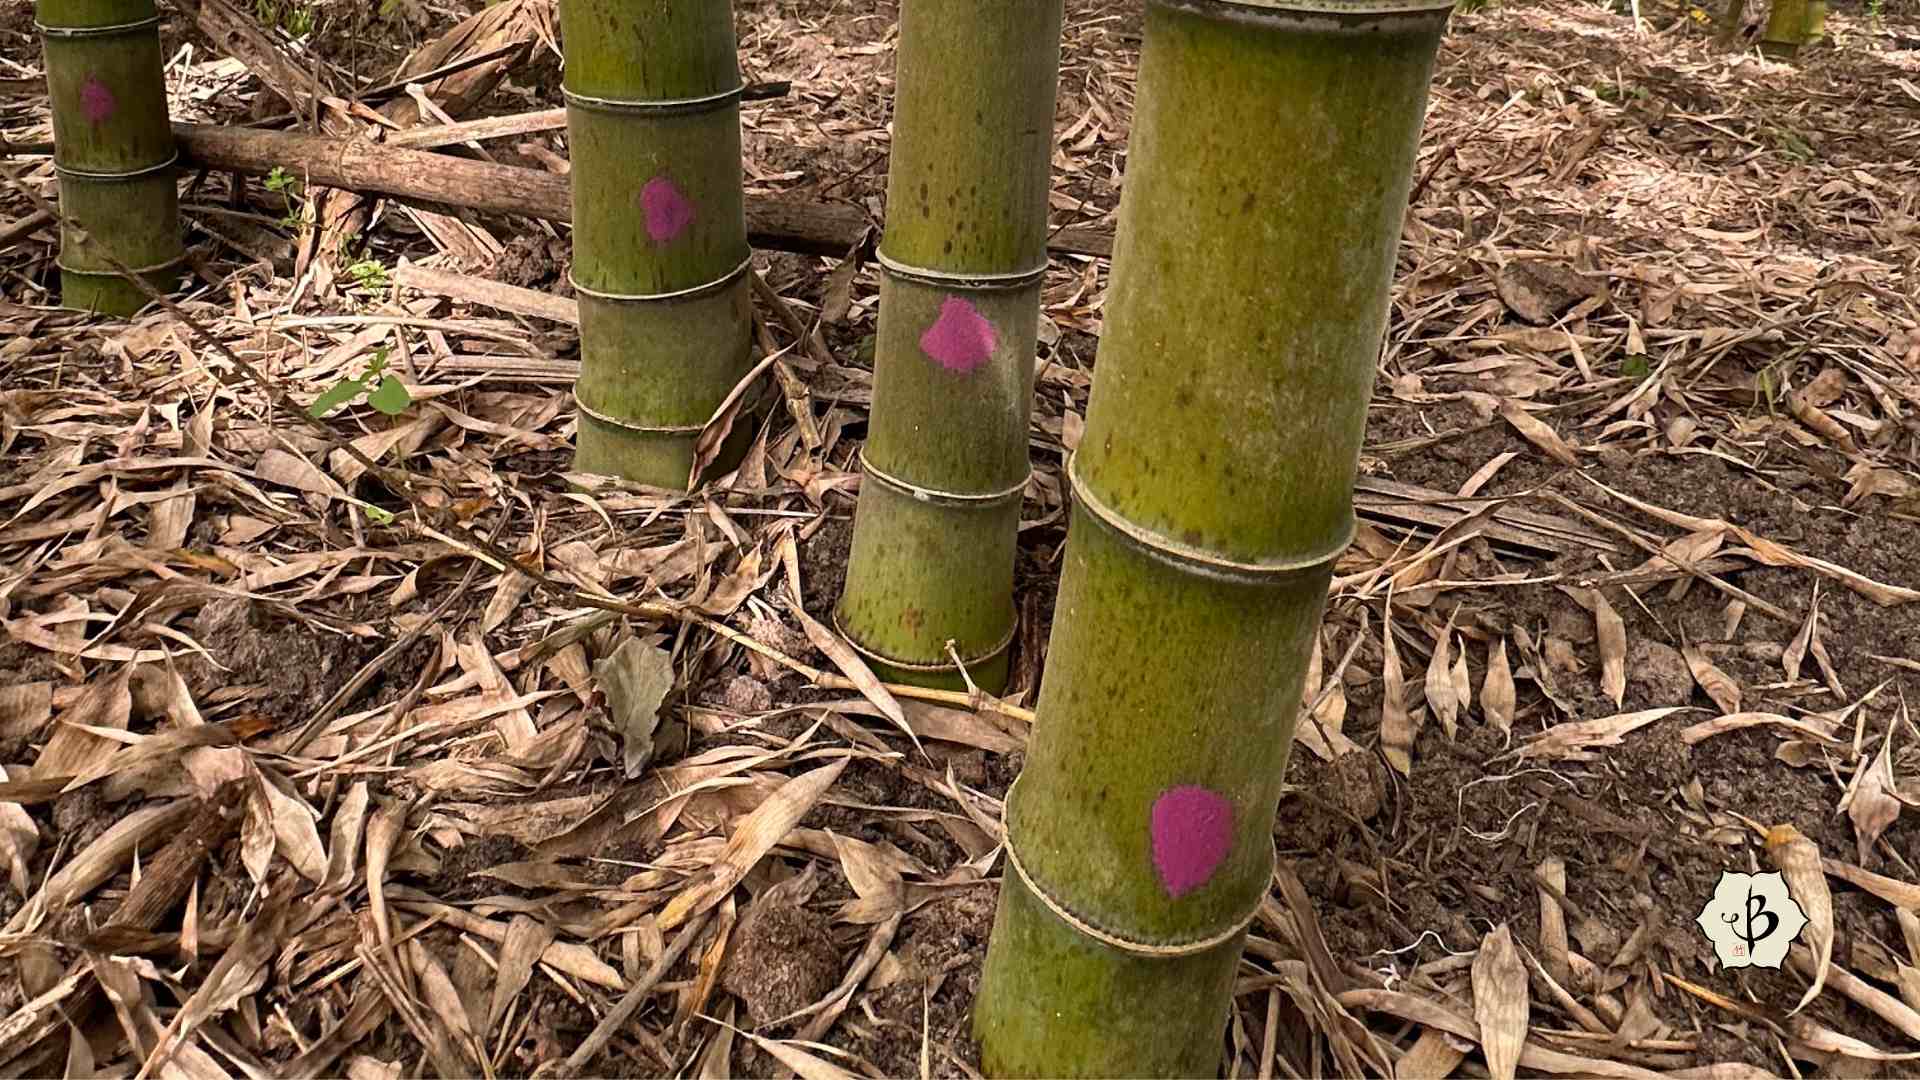 Bamboo harvest age markers